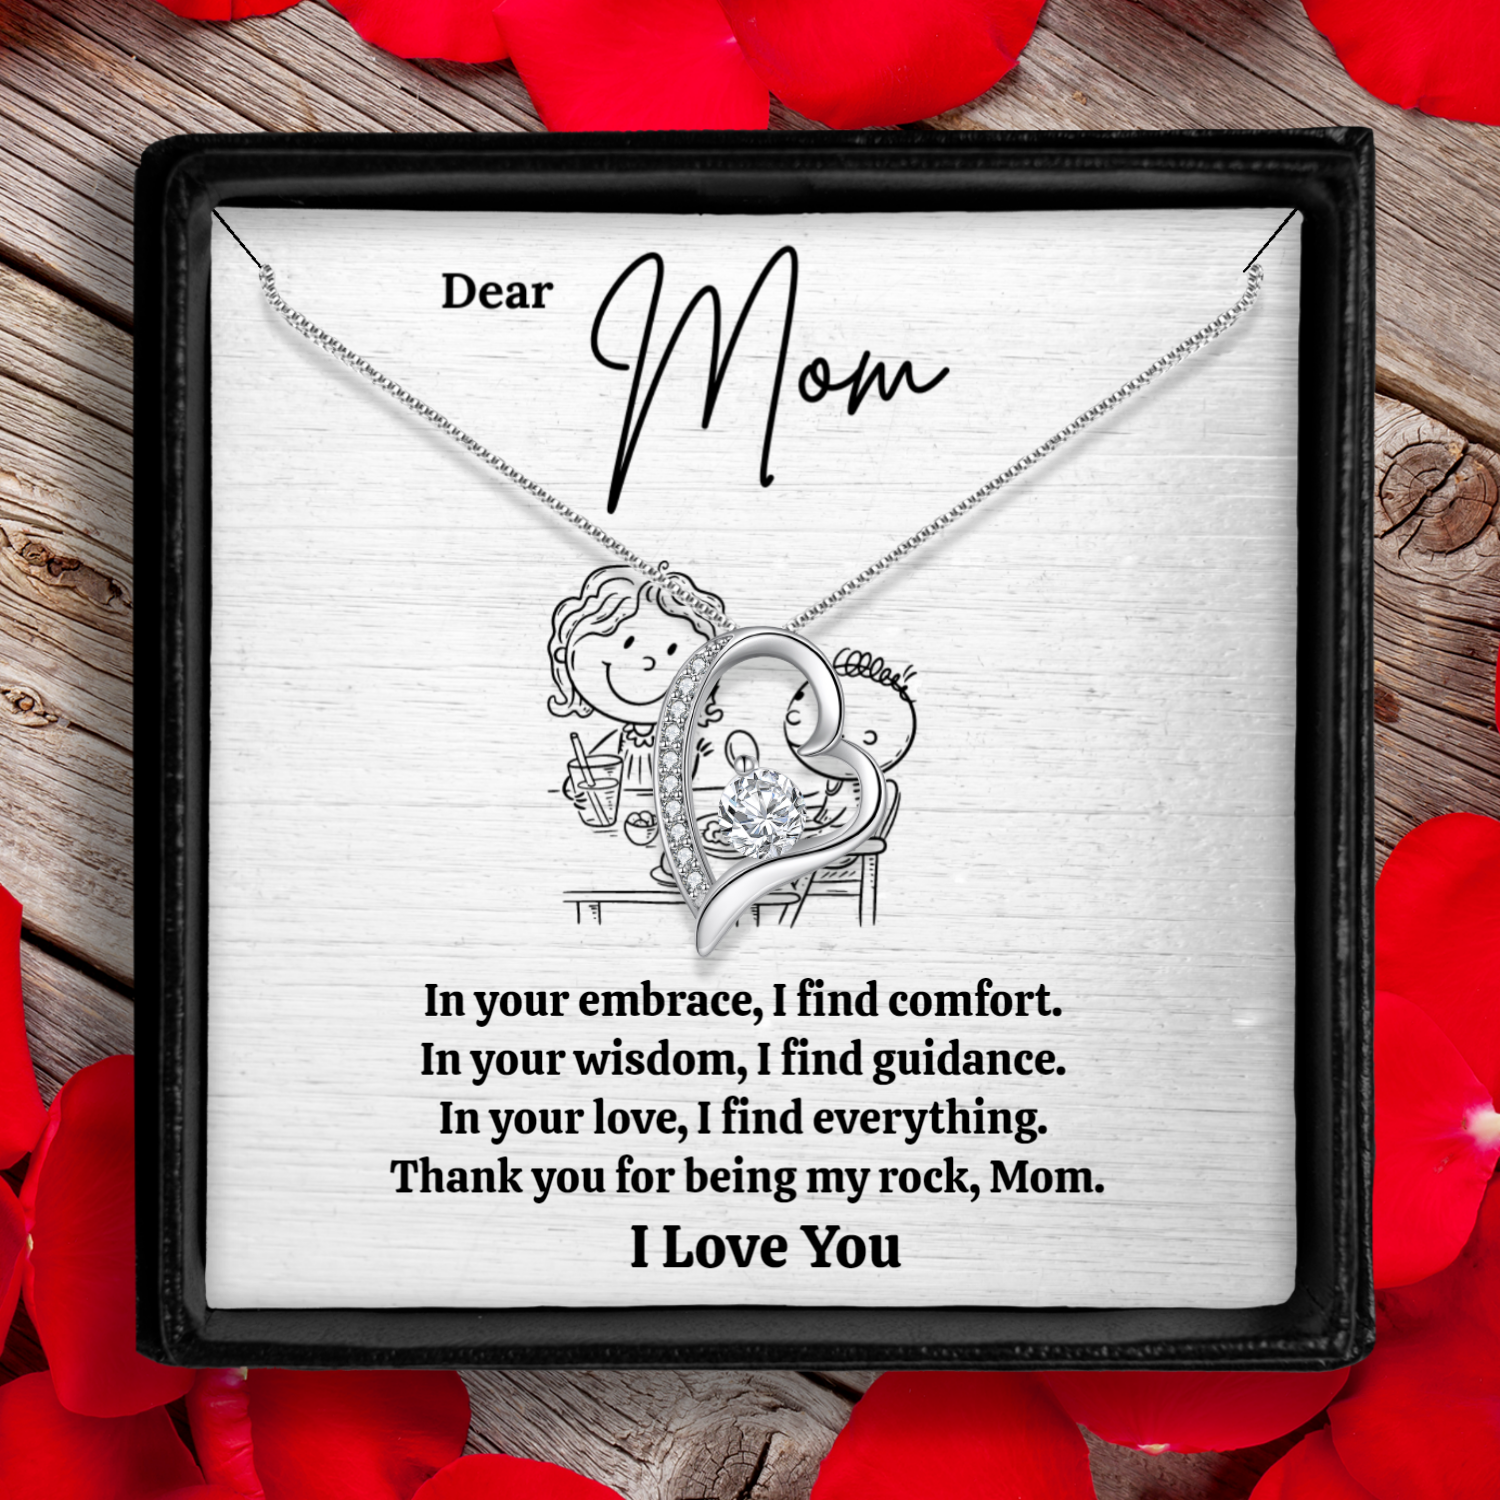 Personalized Necklaces + Message Cards - Mom Eternal Heart Necklace 